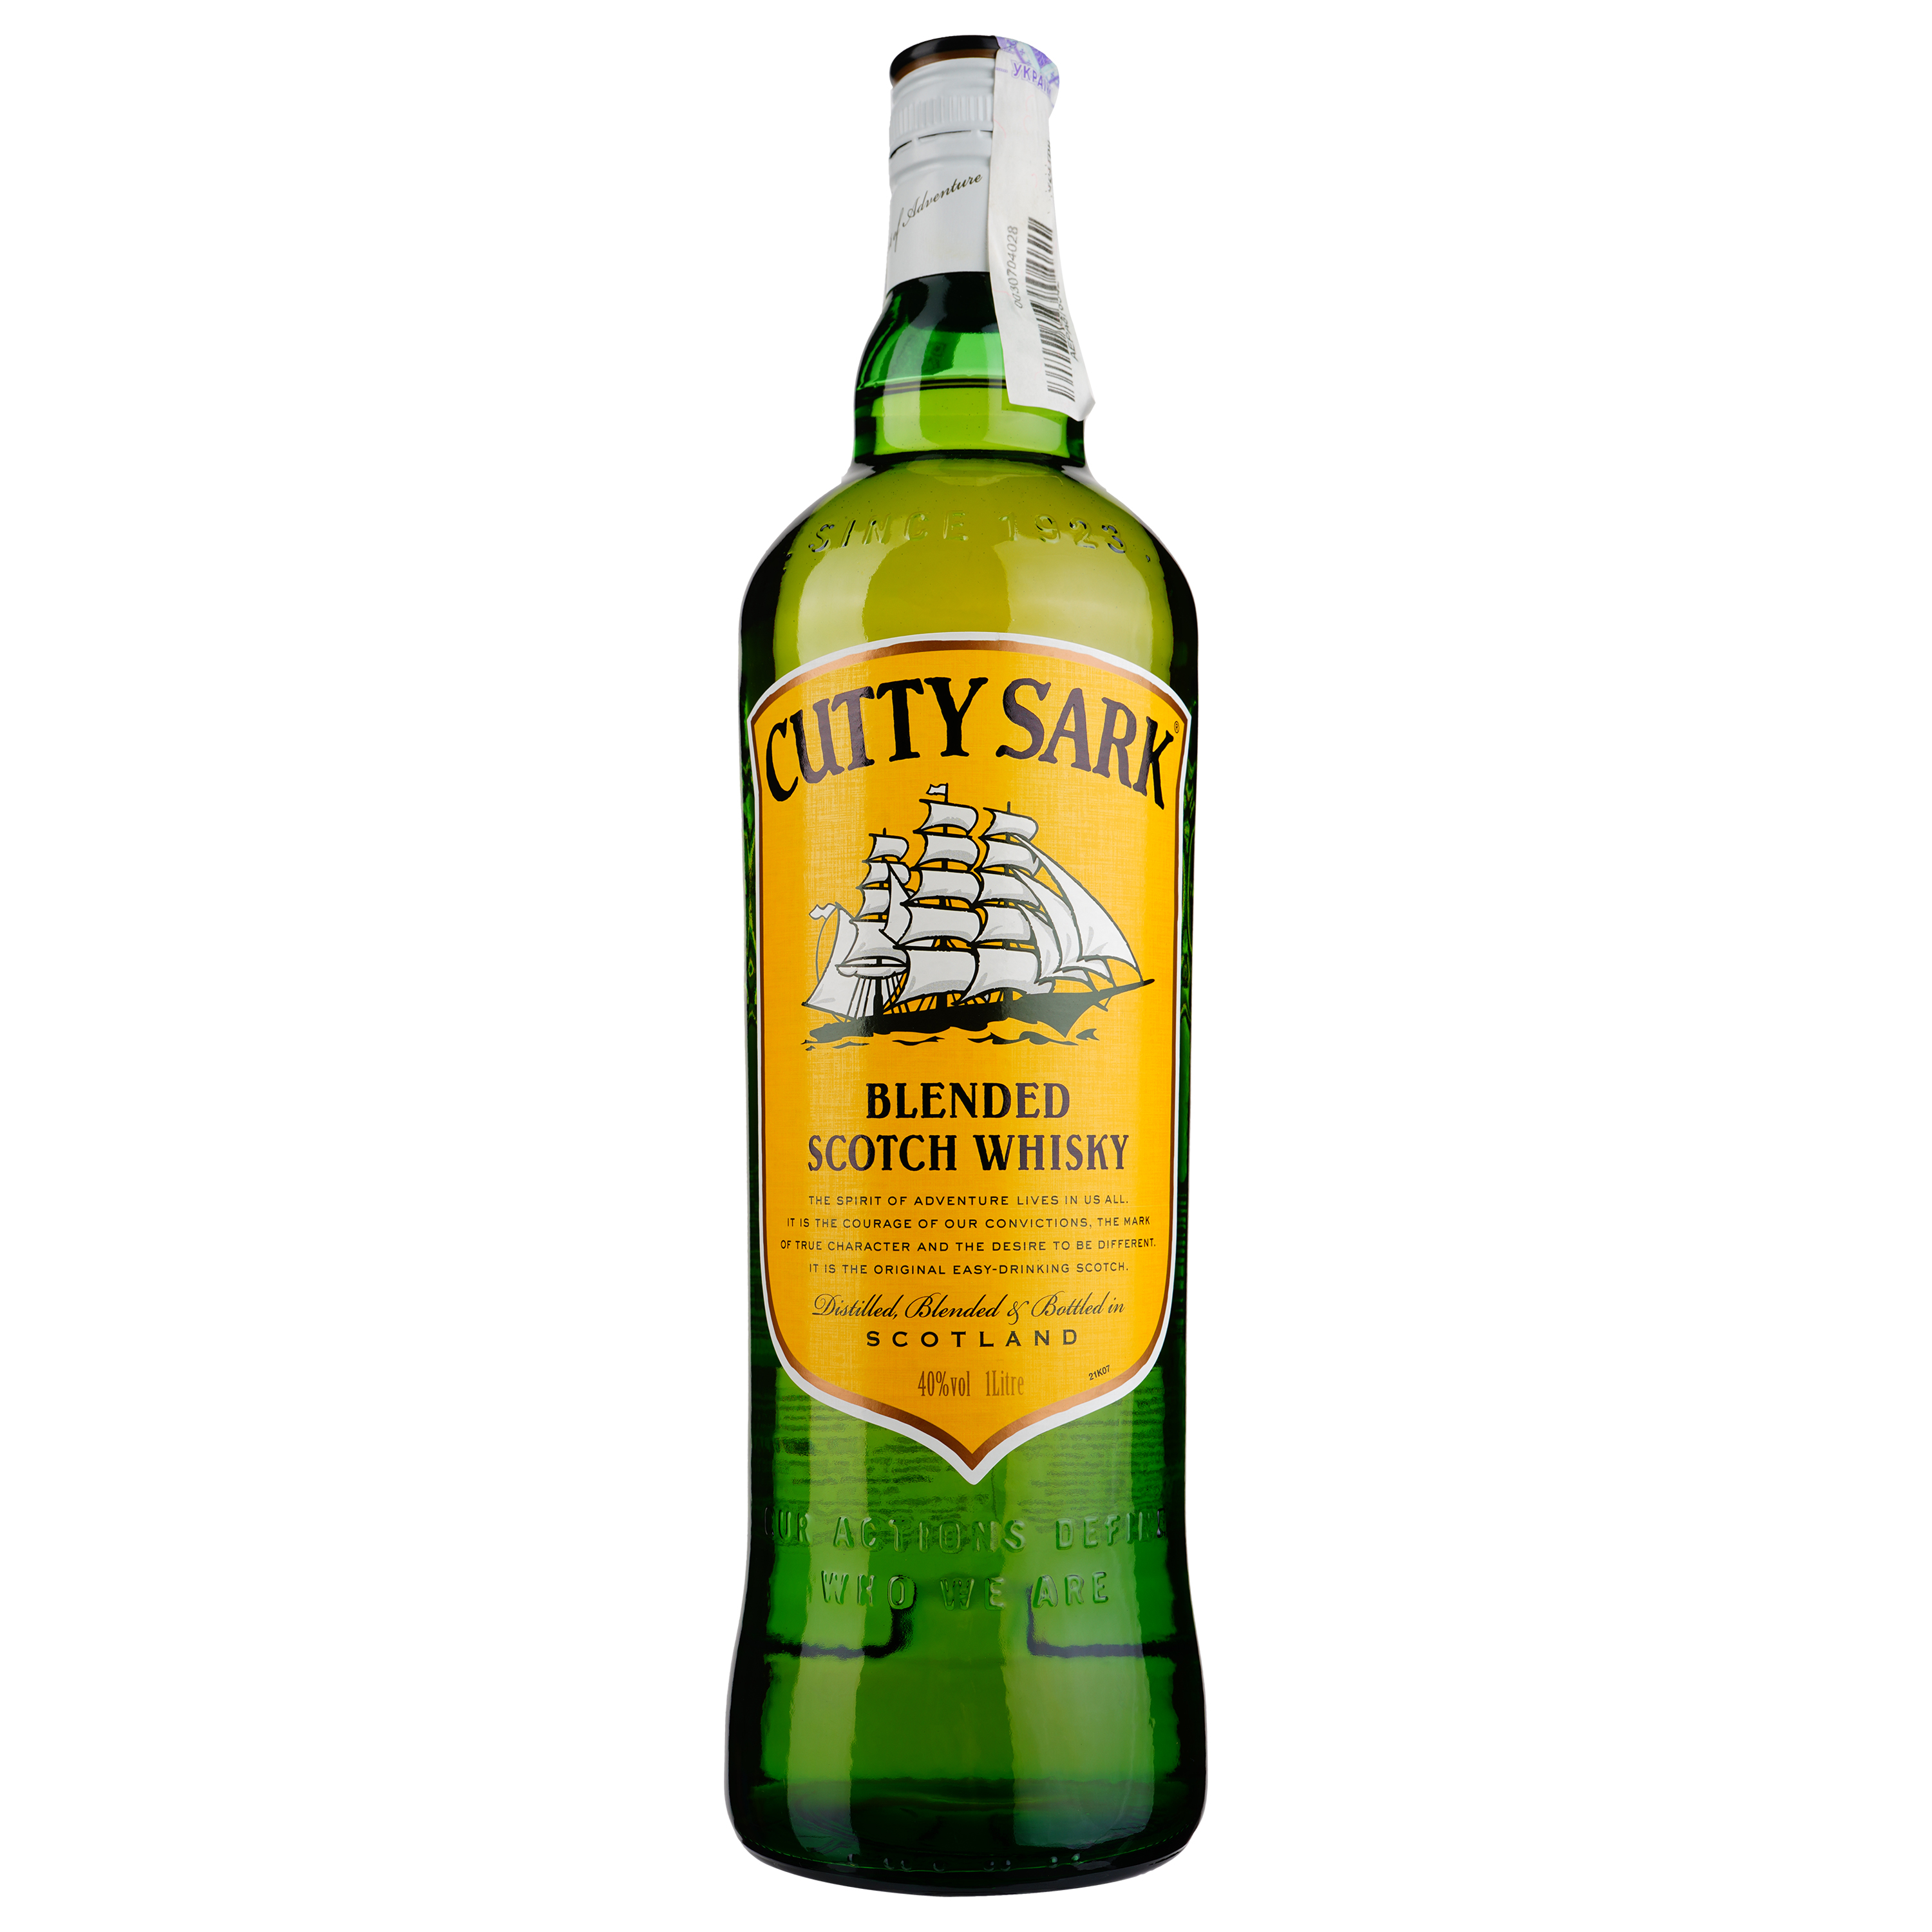 Виски Cutty Sark Blended Scotch Whisky 40% 1 л - фото 1